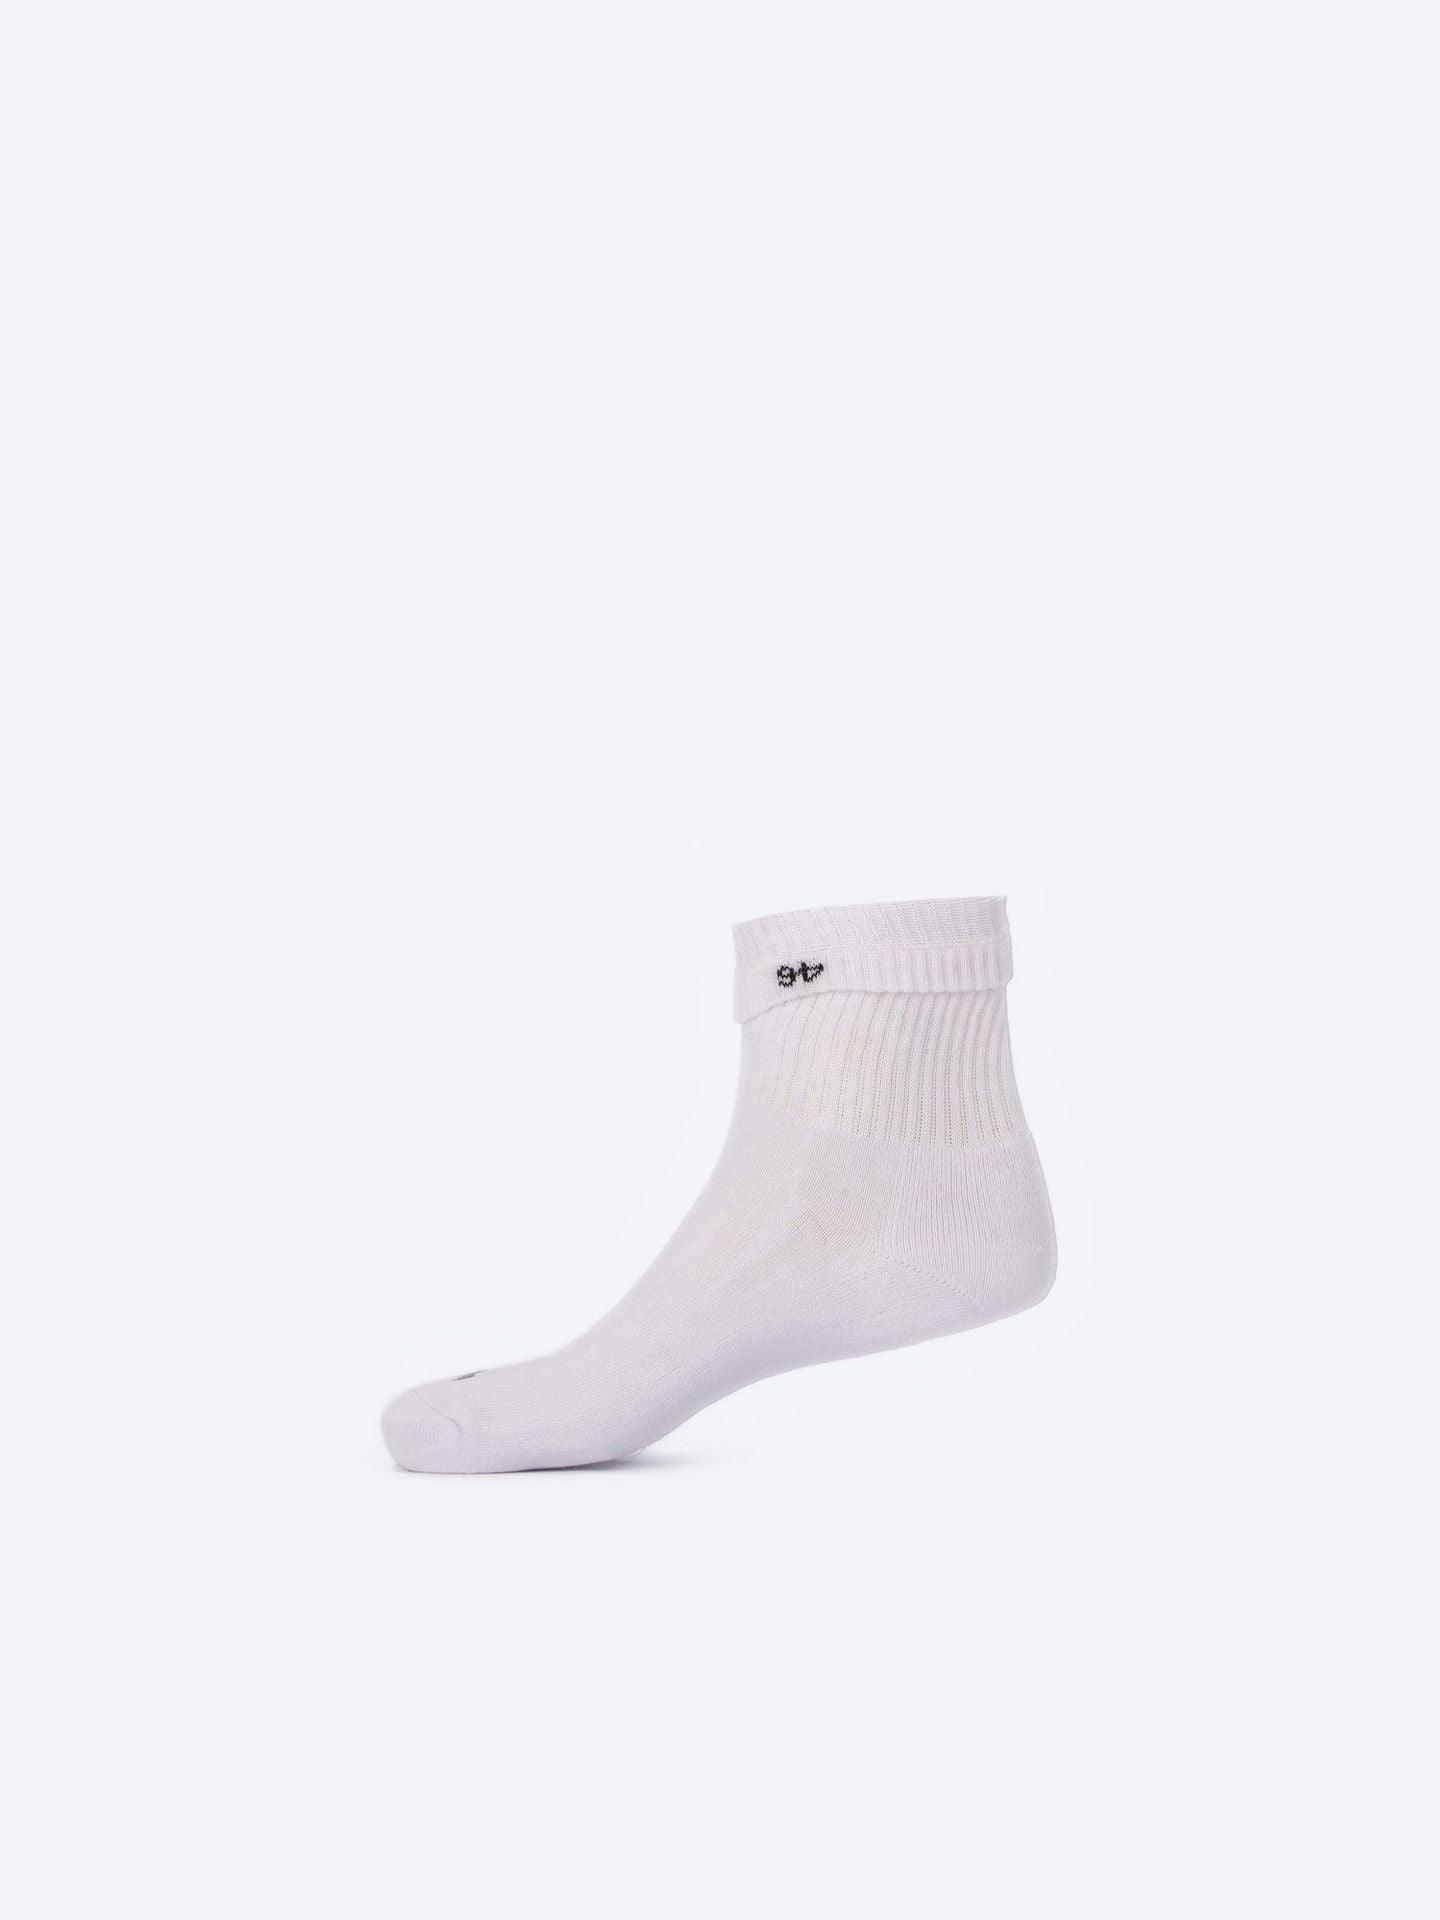 Photo by 𝗔𝗧𝗨𝗠 SPORTSWEAR ® on December 26, 2022. May be kid's white mid-crew training socks with atum logo